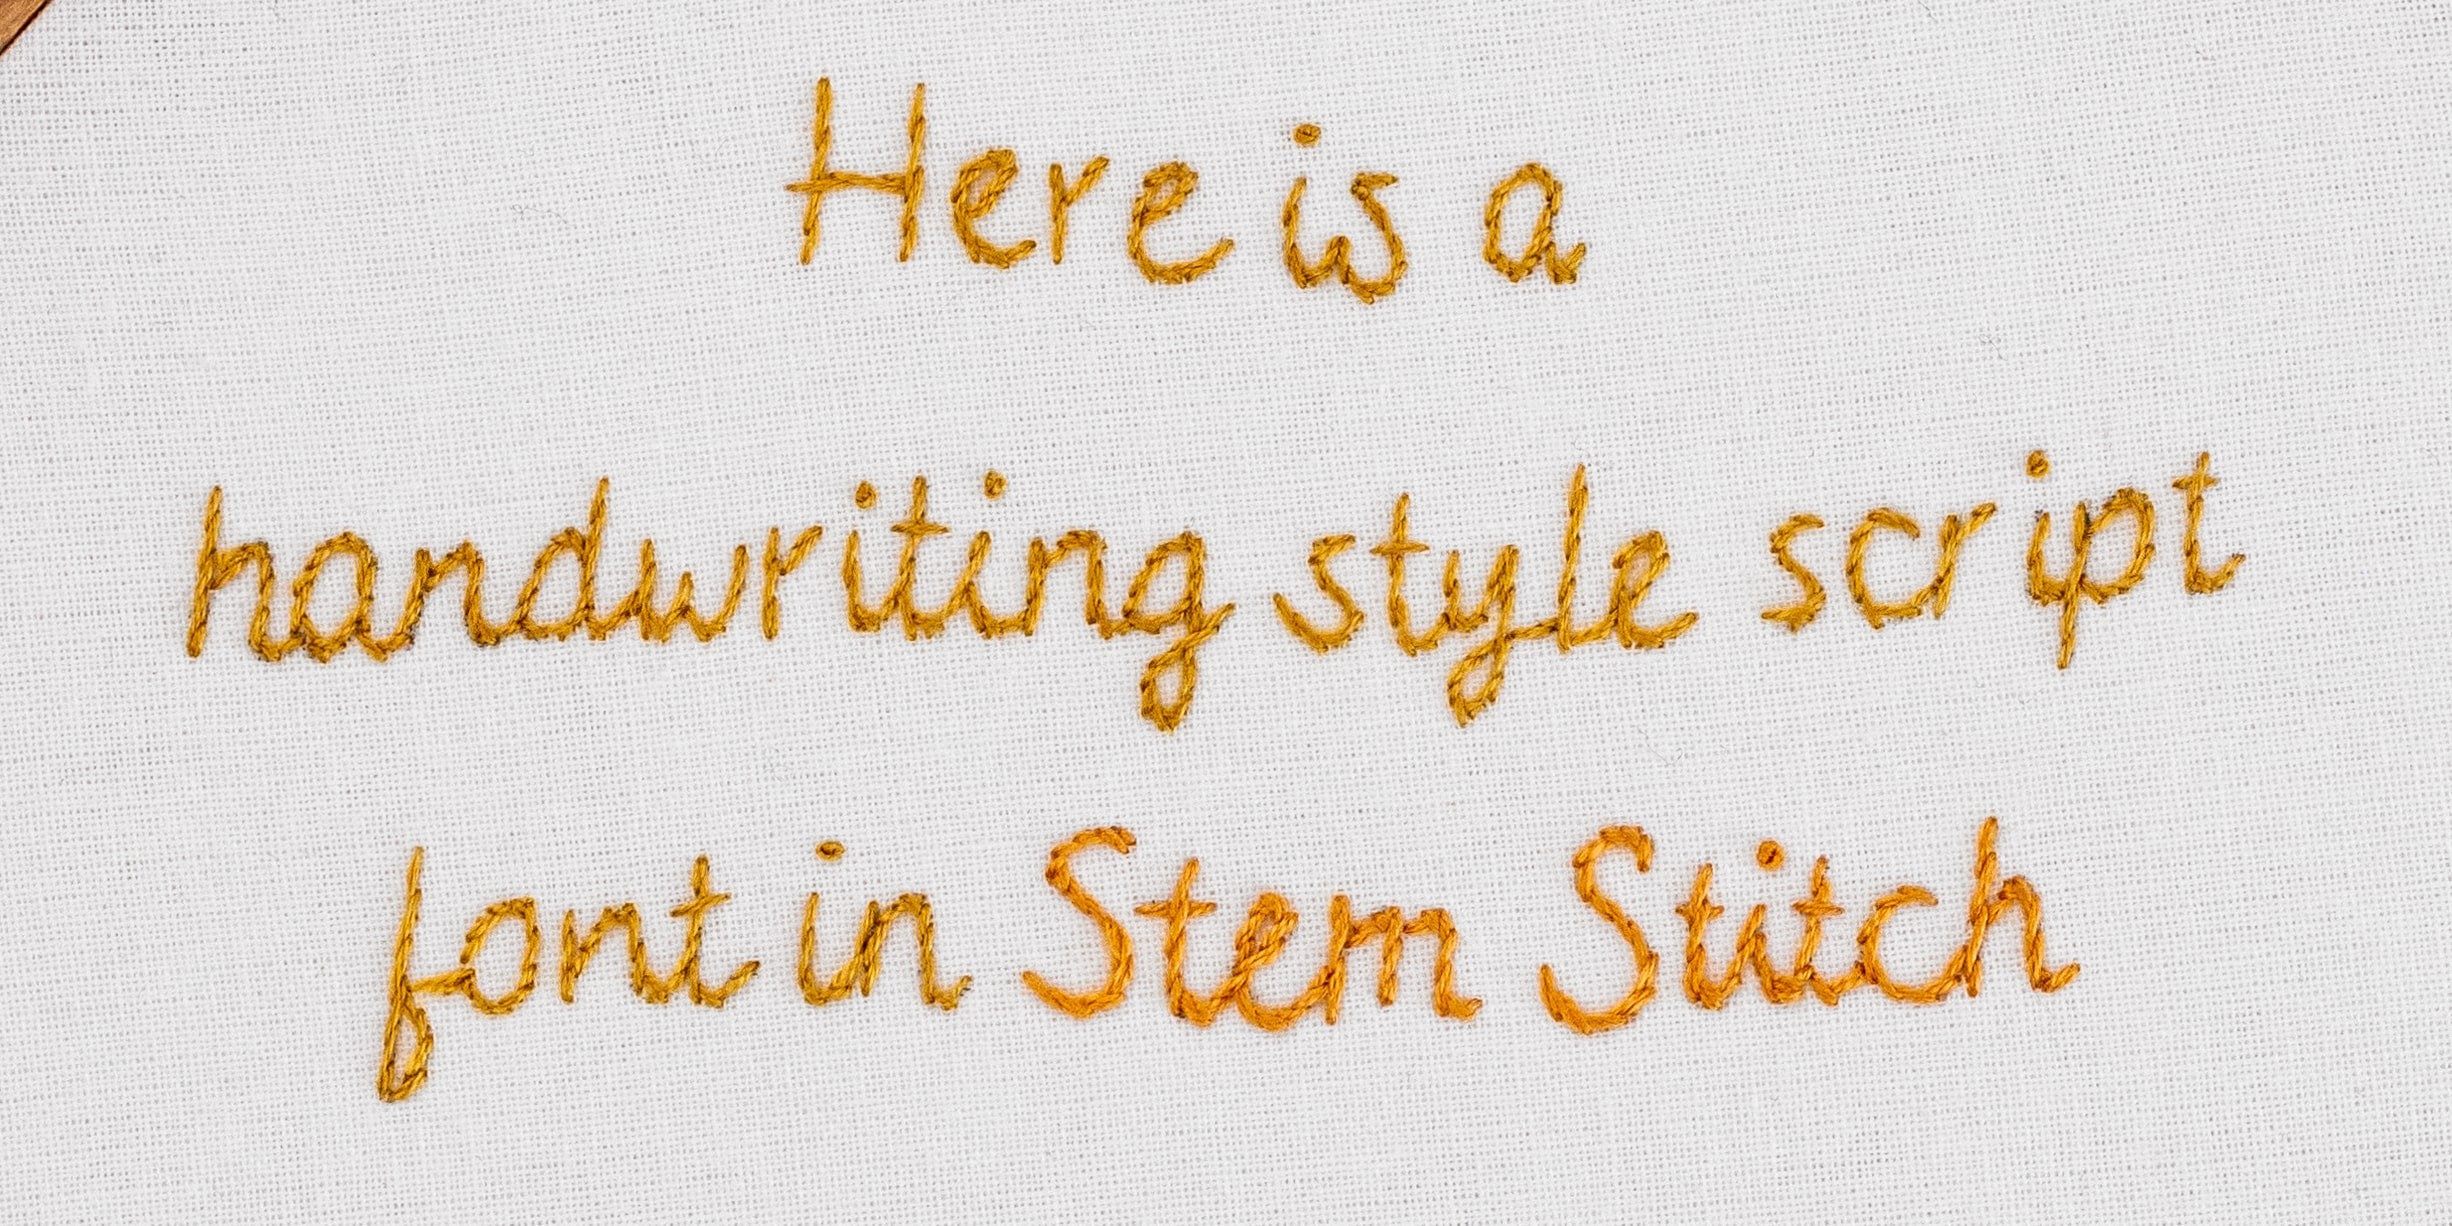 This is an image of a handwritten-looking script stitched in stem stitch.